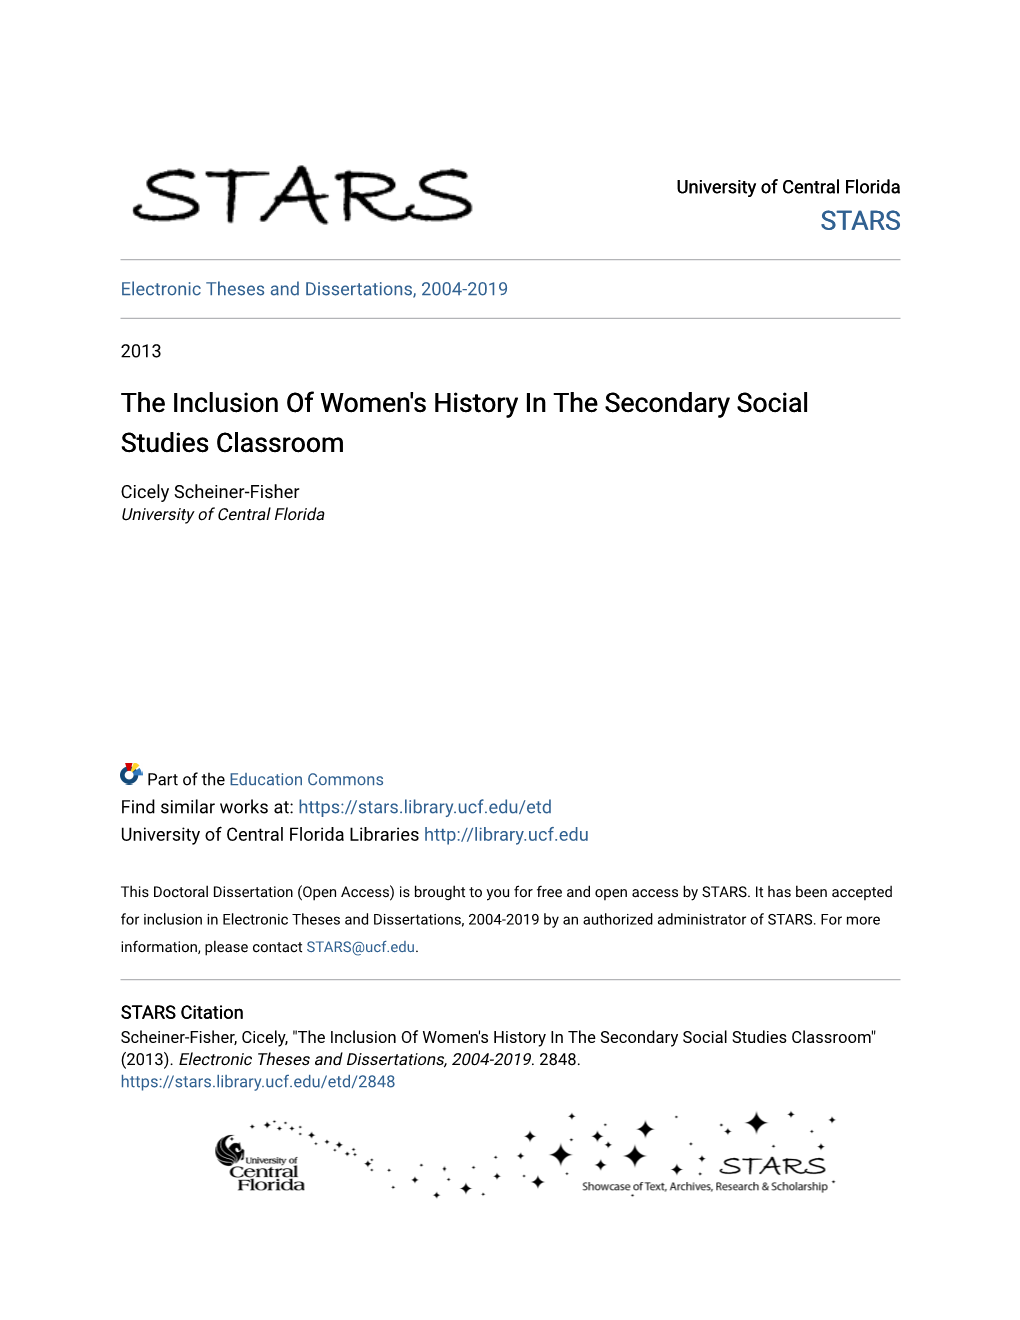 The Inclusion of Women's History in the Secondary Social Studies Classroom